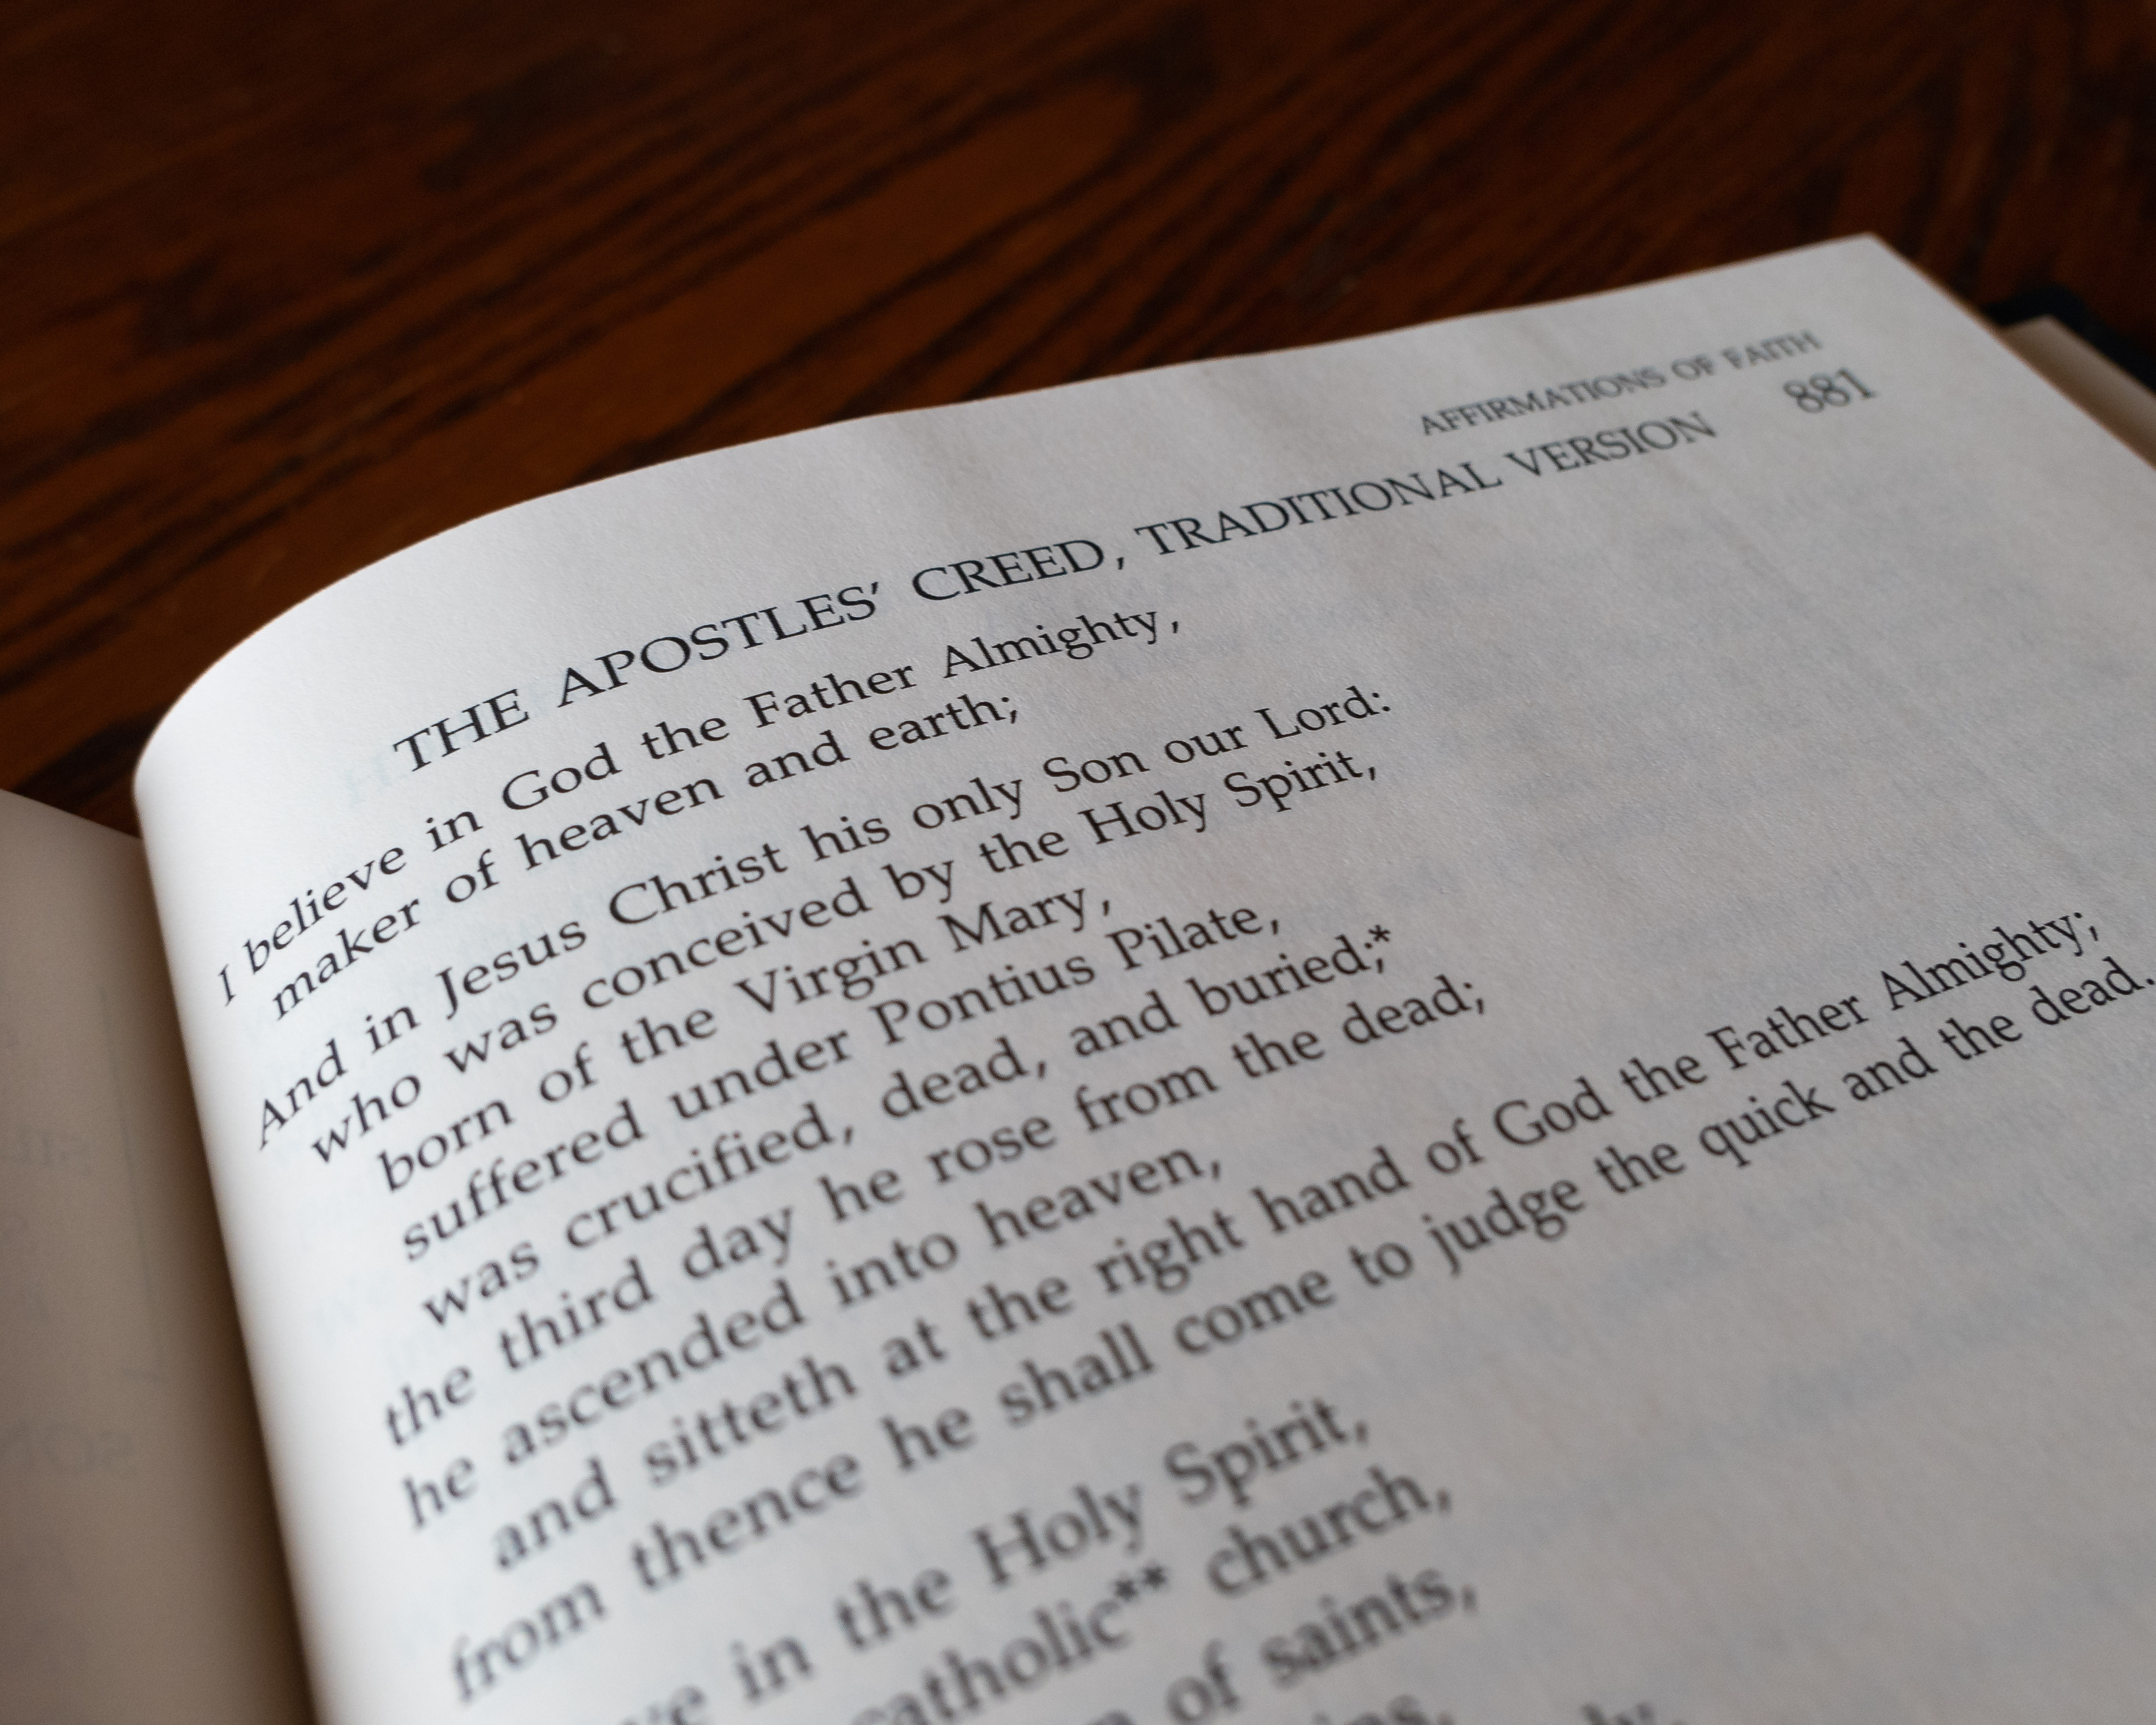 The Apostle’s Creed: I Believe in God, the Father Almighty